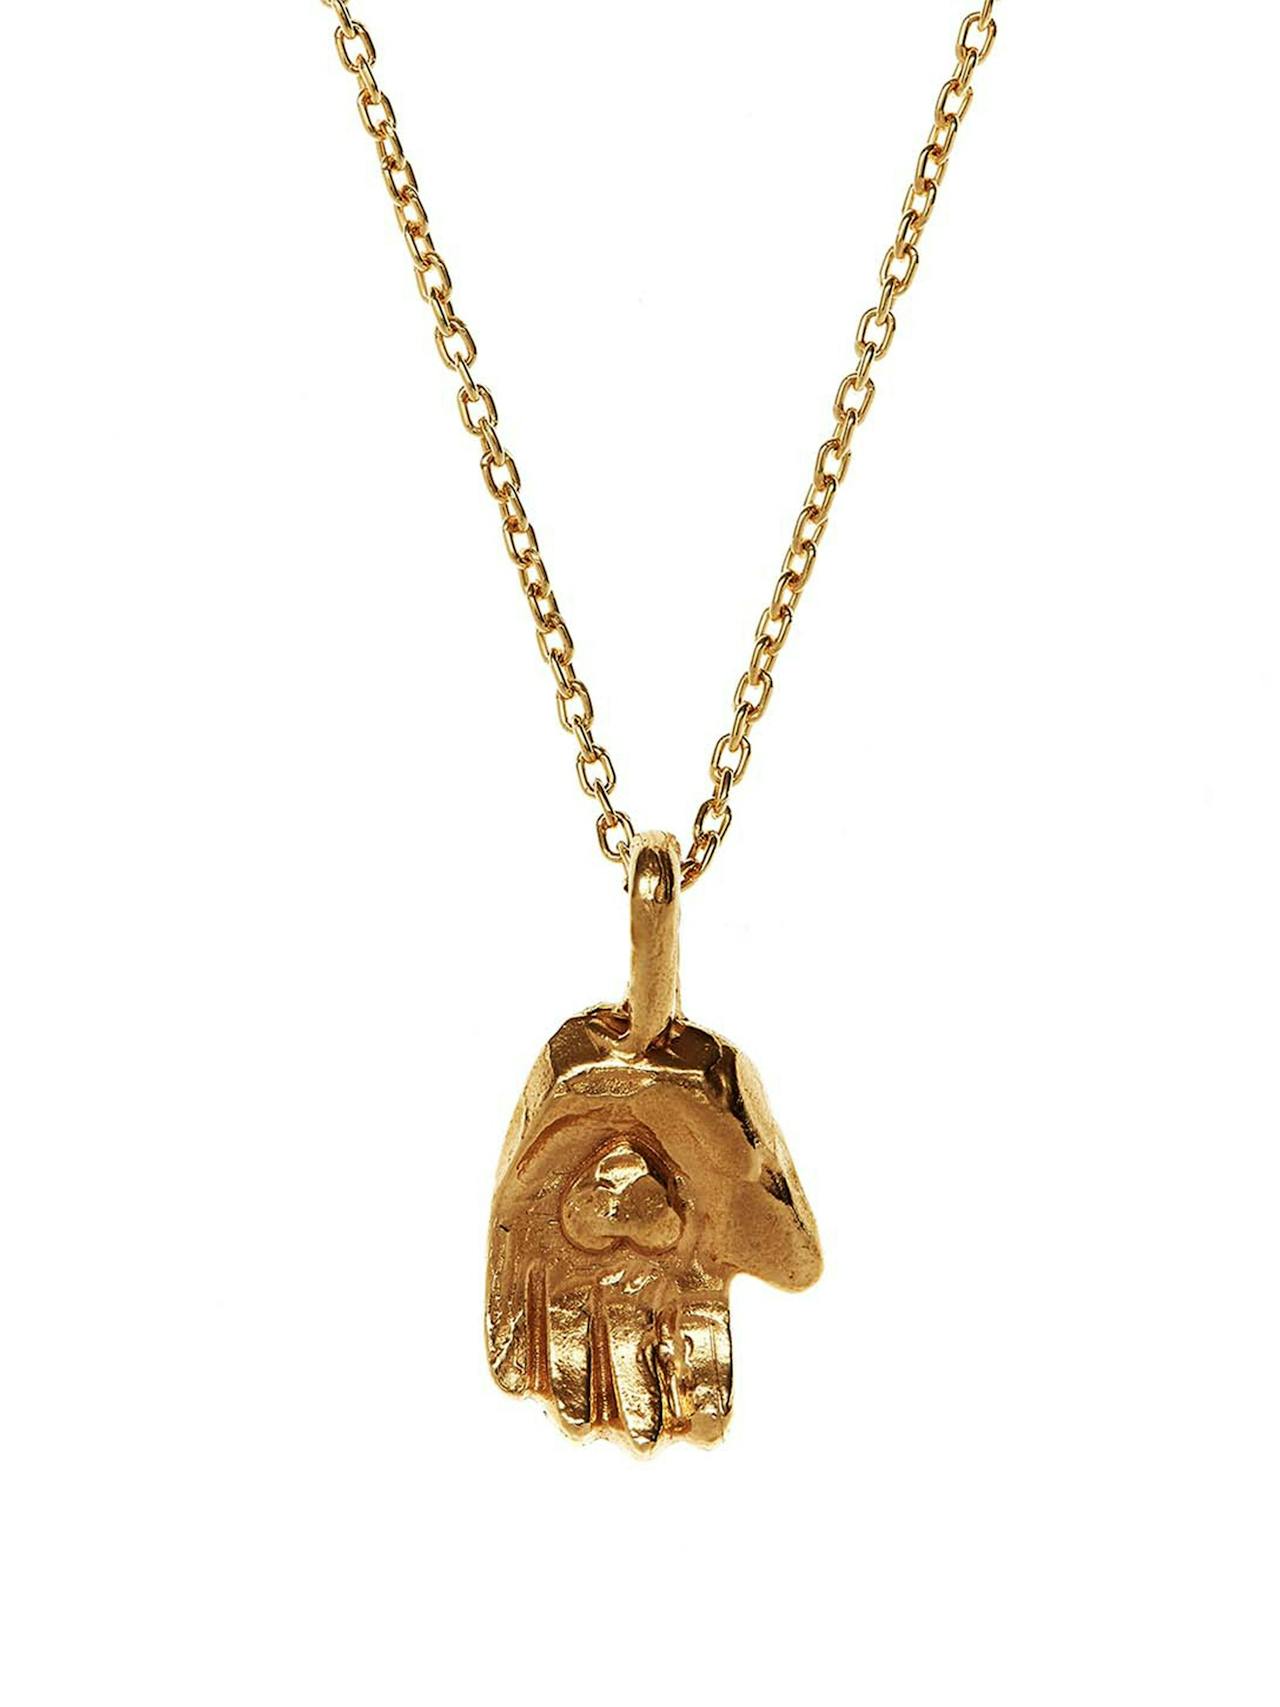 The token of love amulet necklace